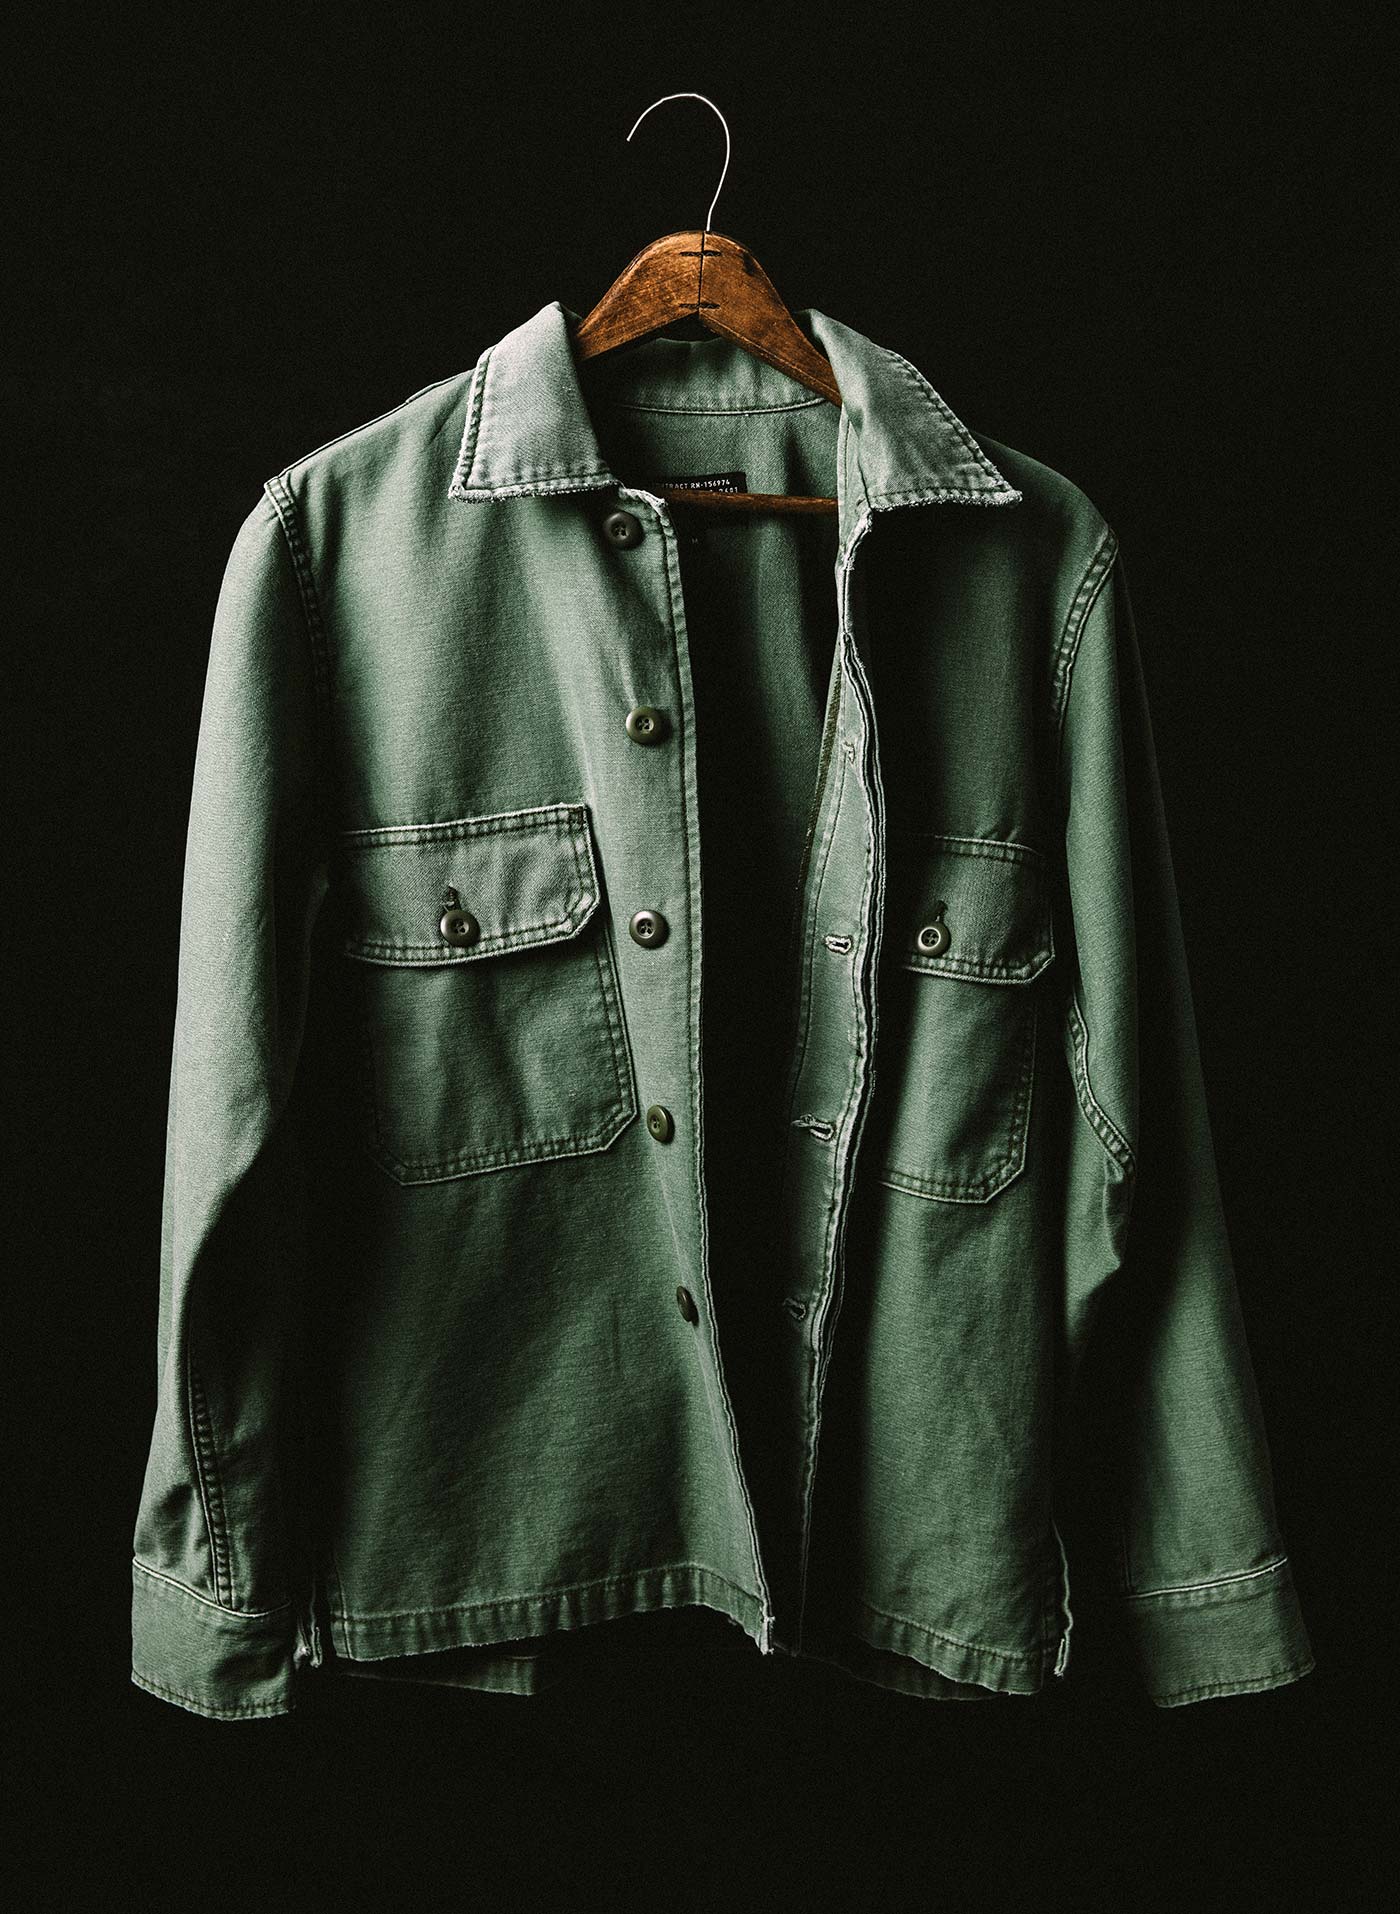 military shirt jacket in fatigue green